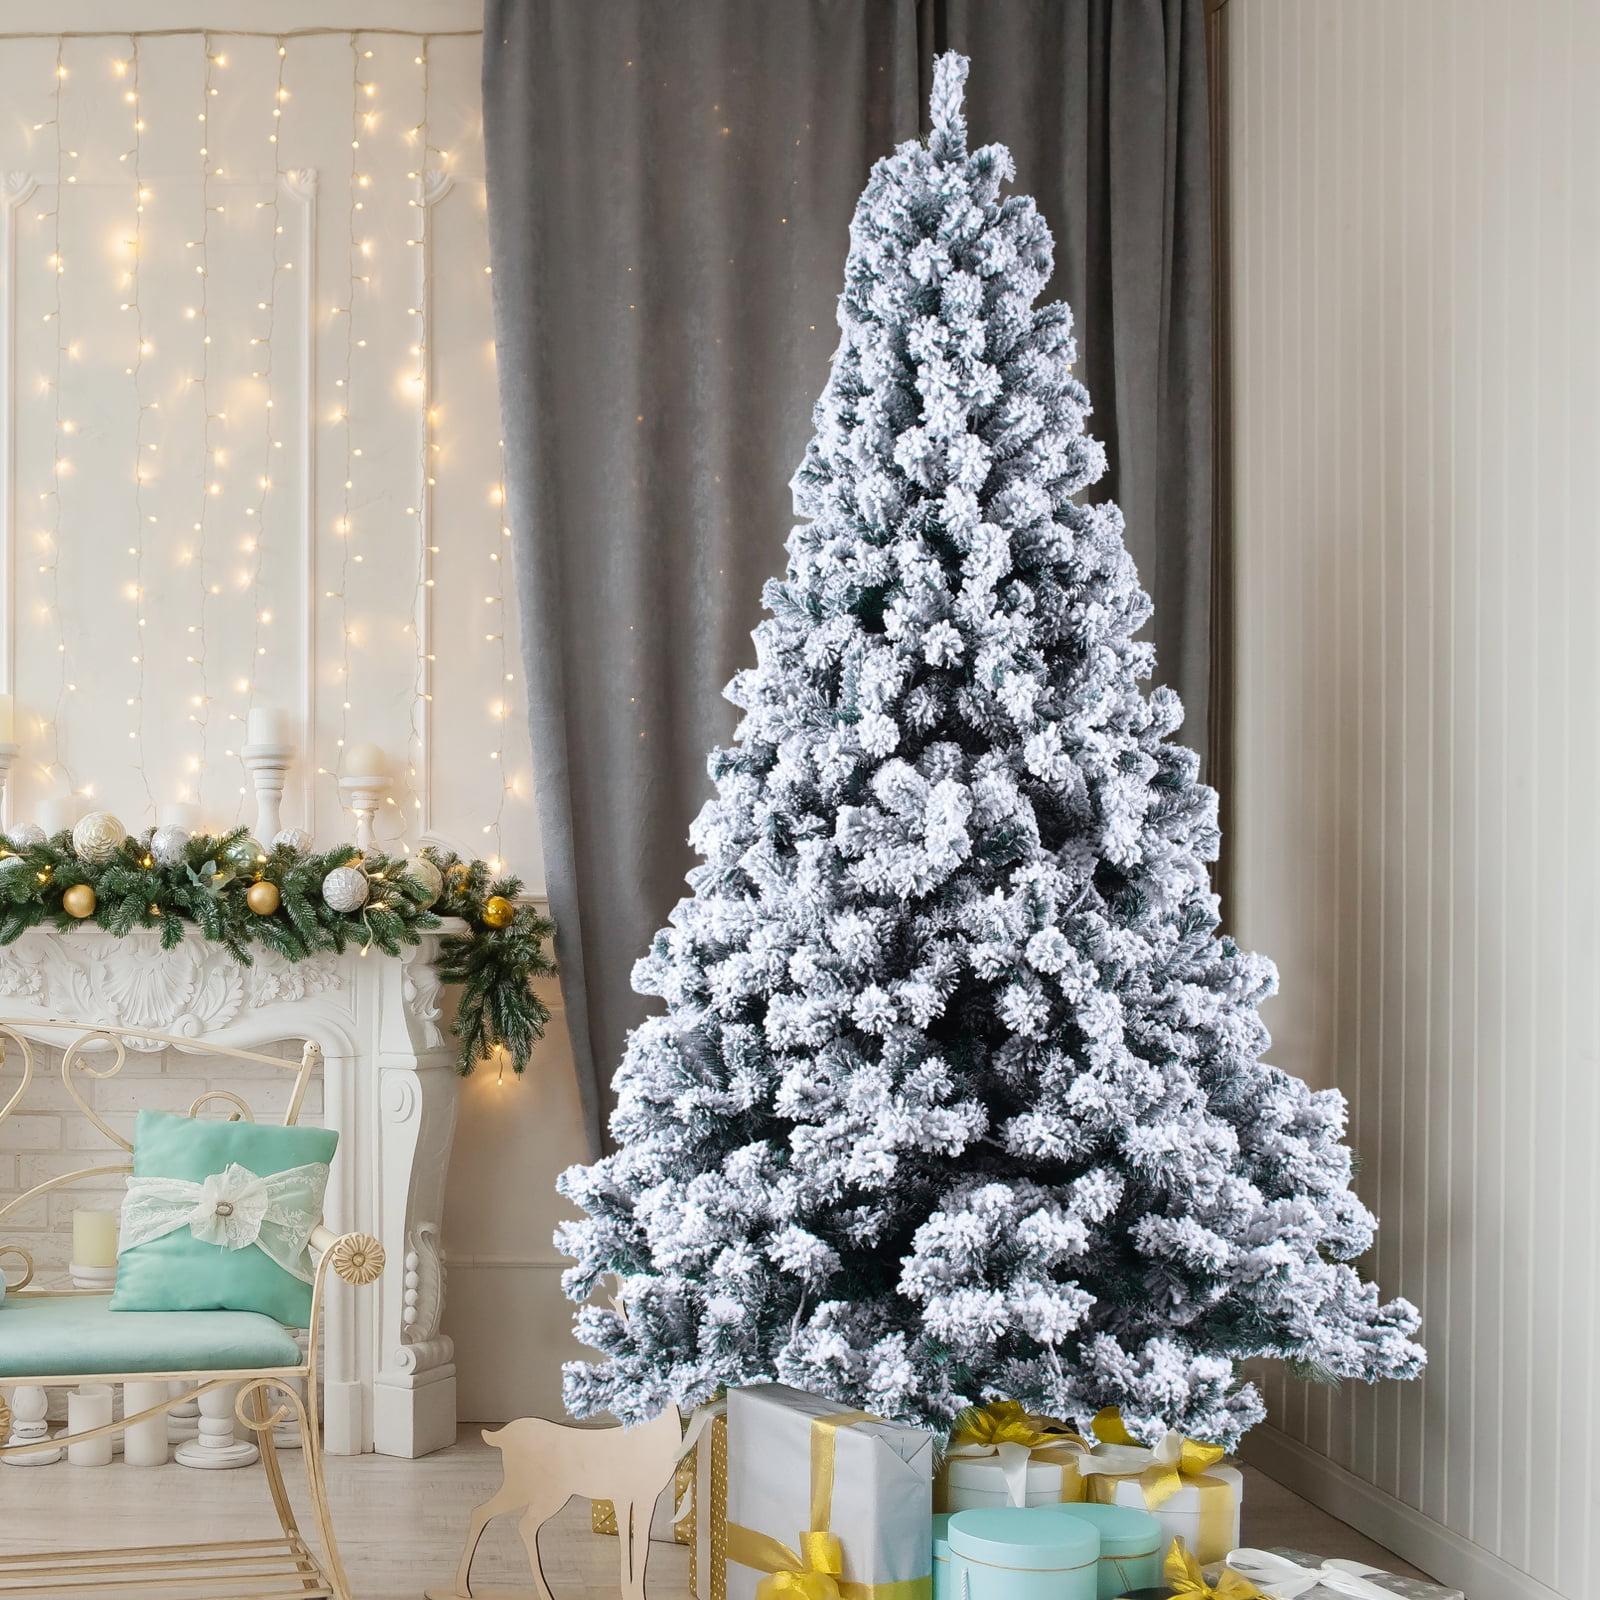 4ft 5ft 6ft 7ft White Christmas Tree With Lights Xmas Bushy Branches Metal Stand 